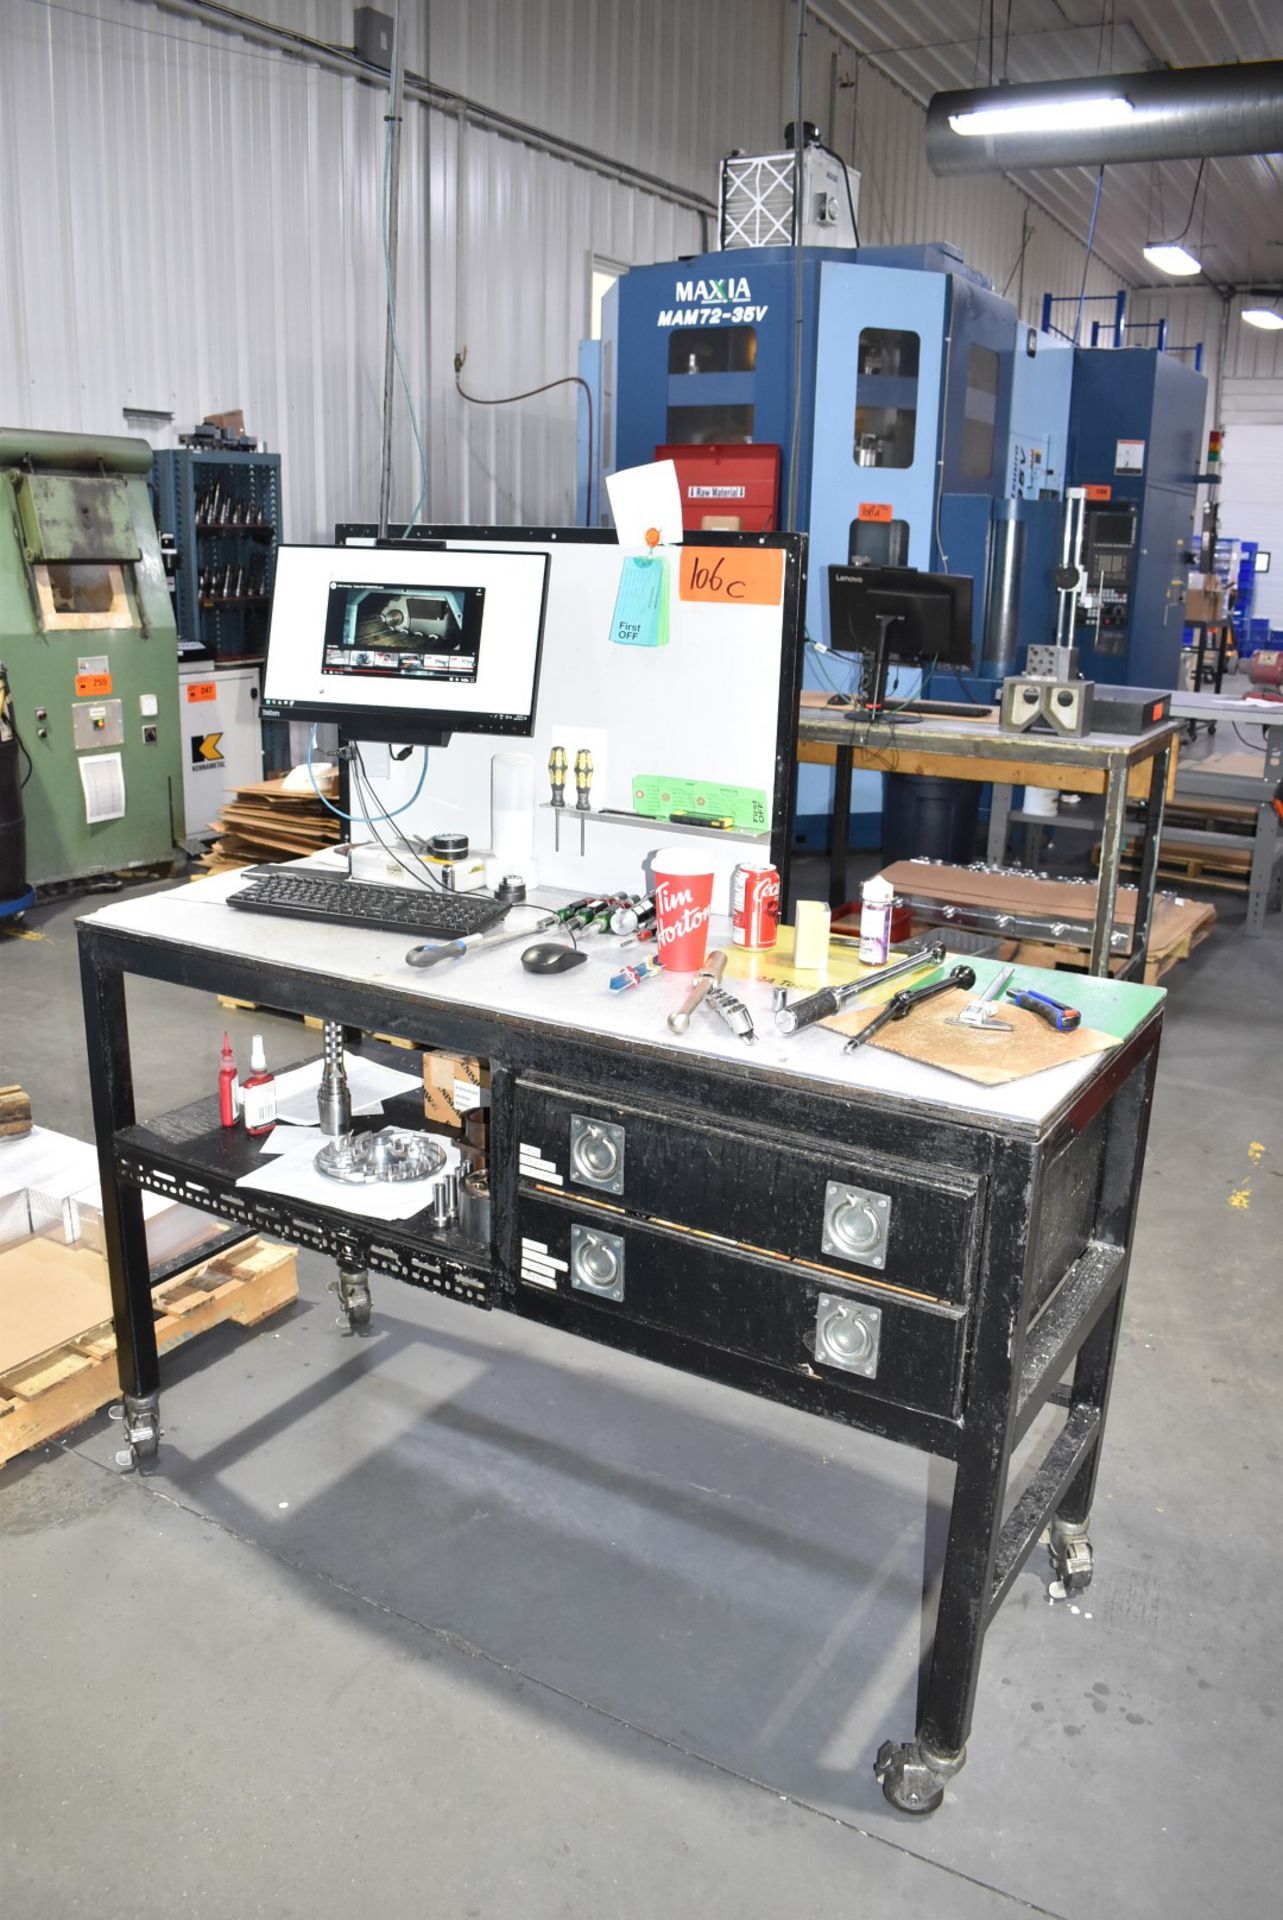 LOT/ ROLLING SHOP TABLE WITH LENOVO THINKCENTER COMPUTER